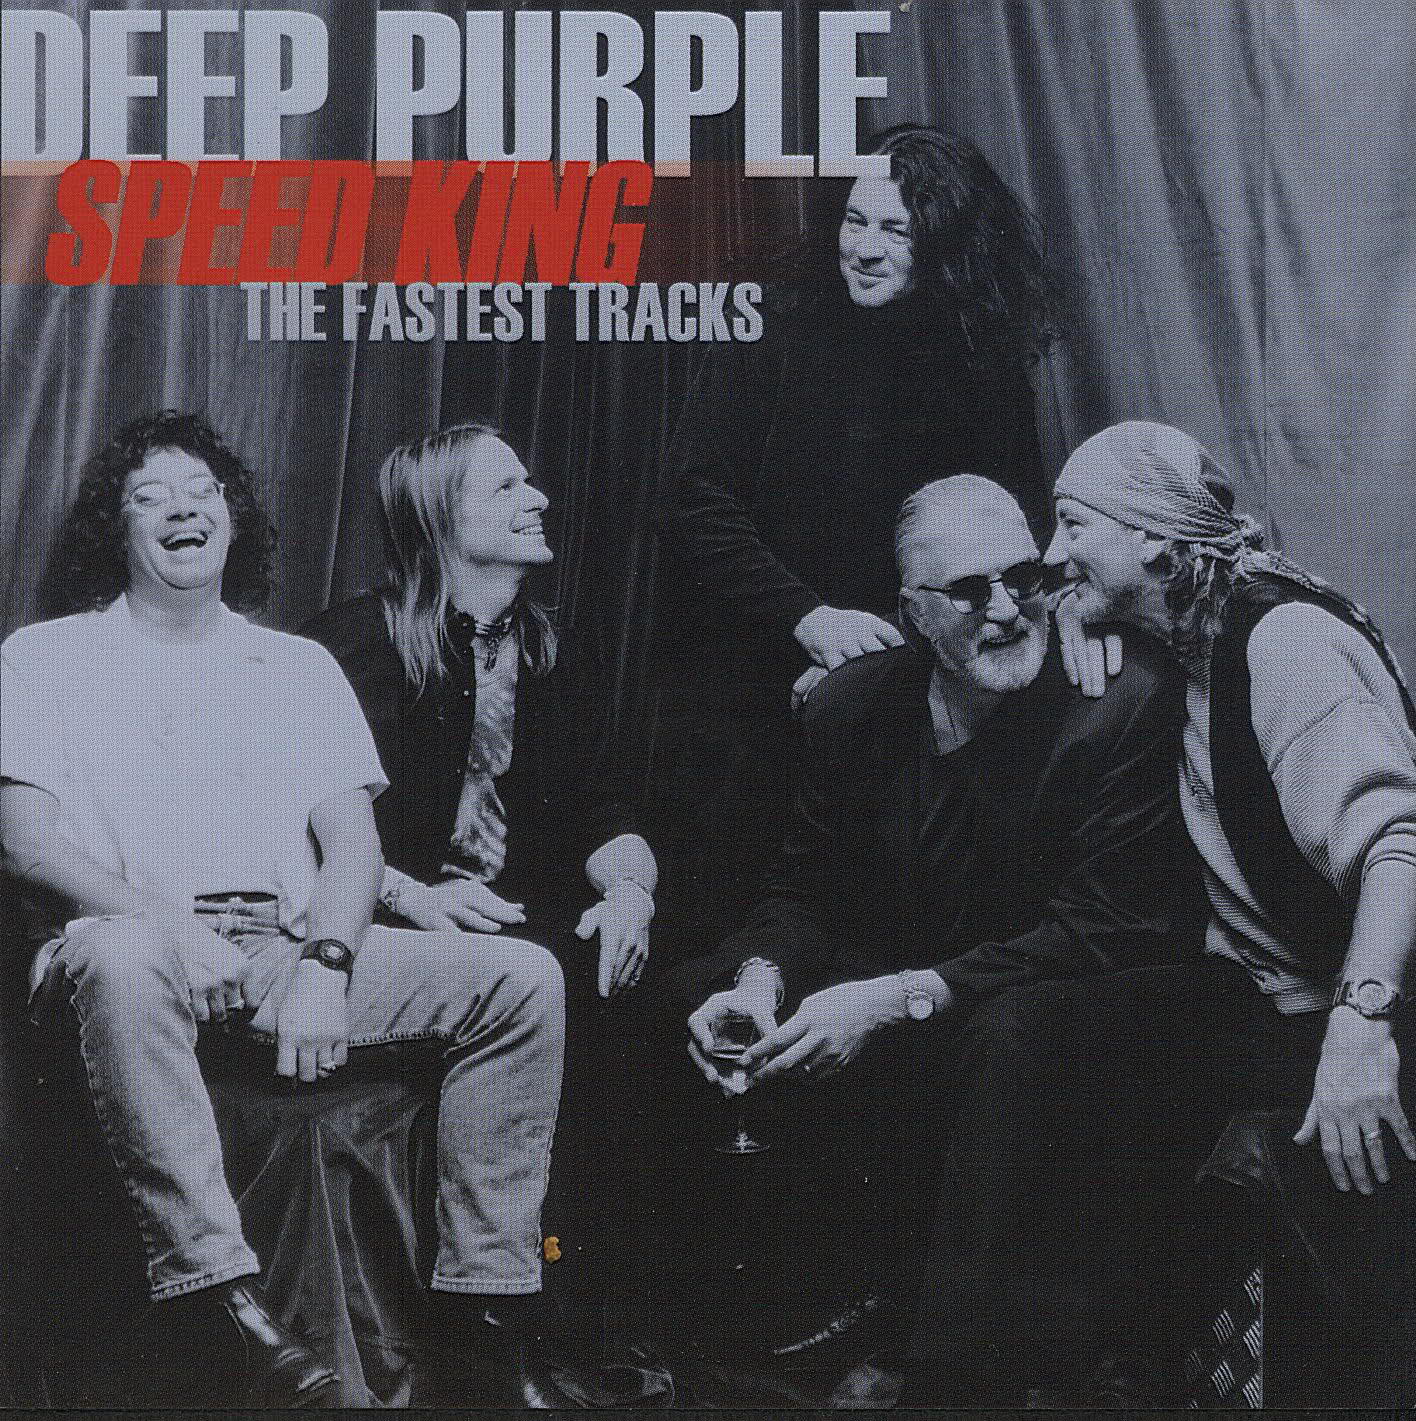 DEEP PURPLE - Speed King: The Fastest Tracks cover 